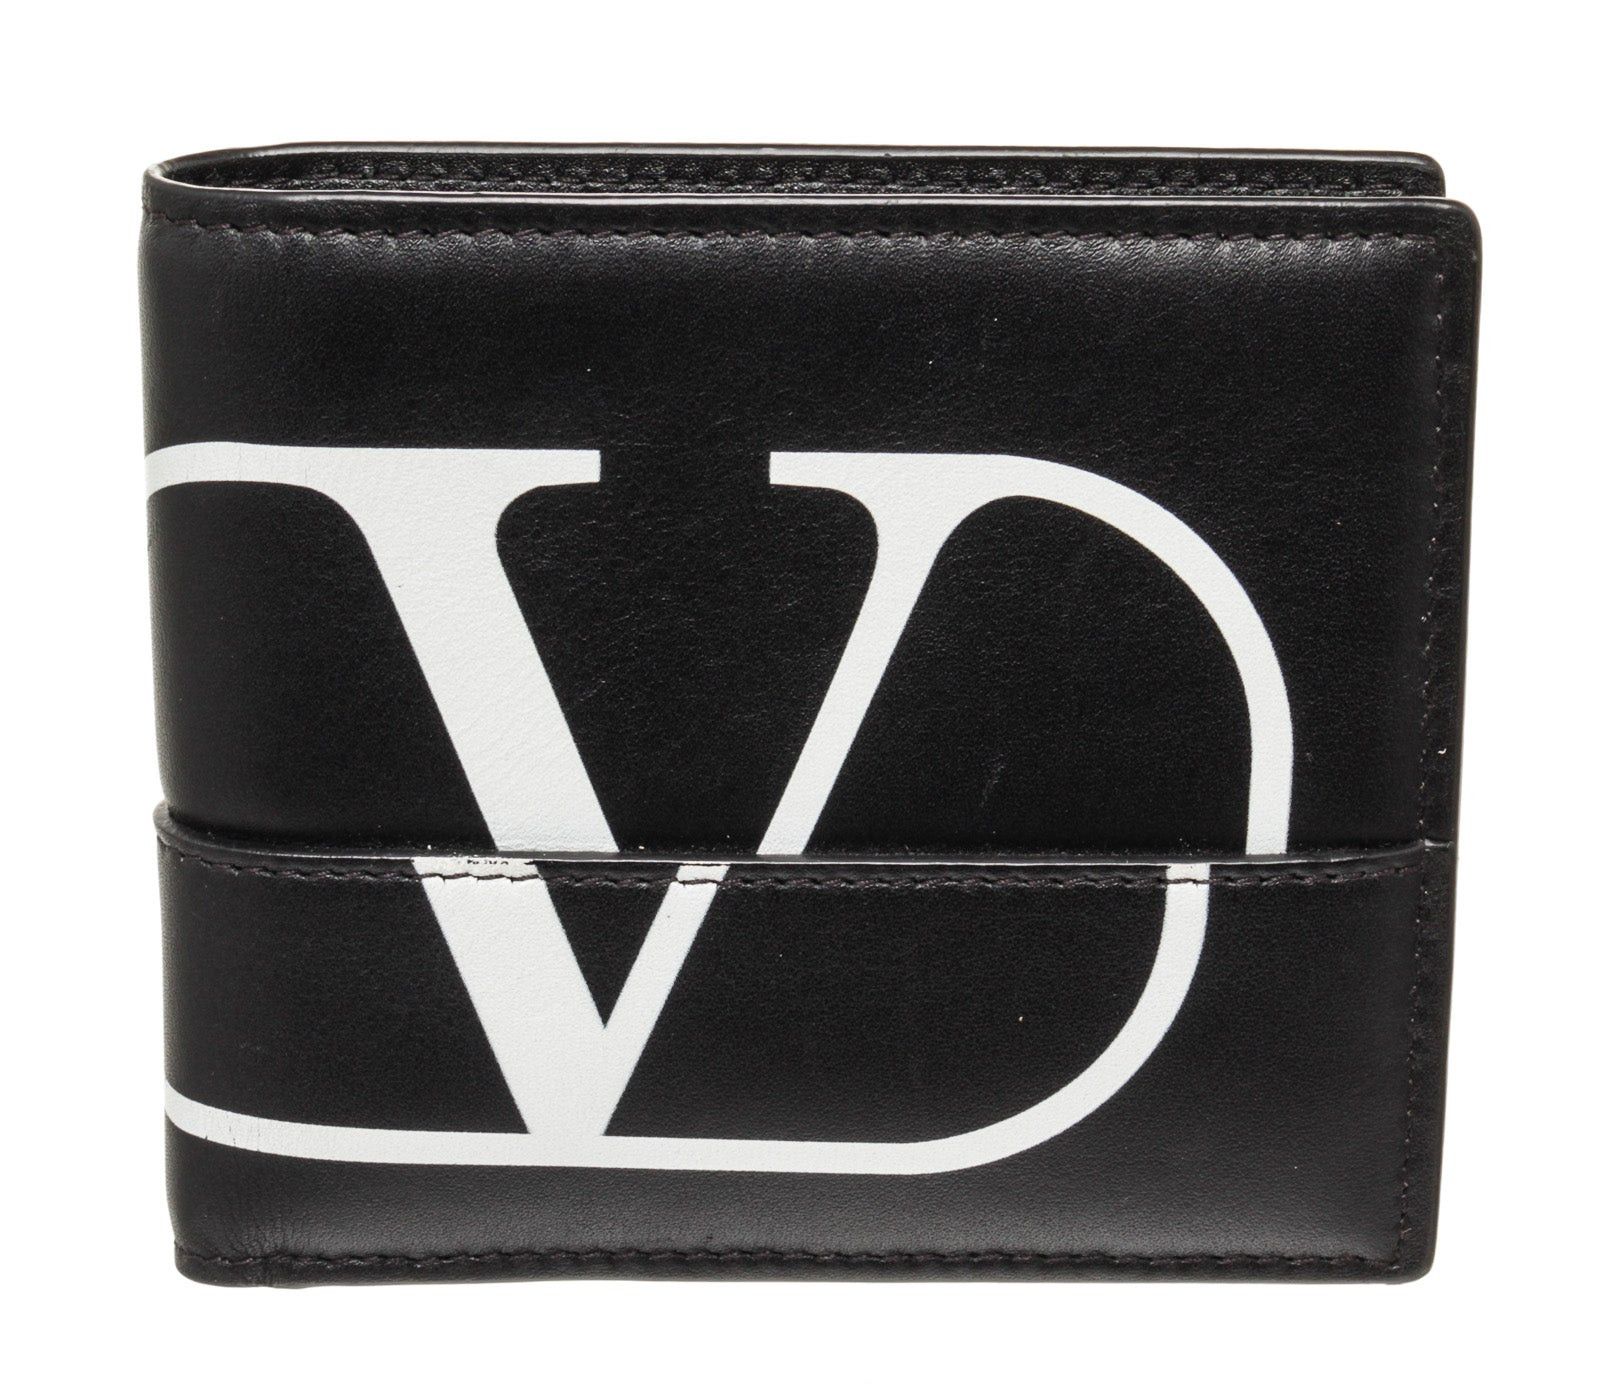 Valentino Valentino Black Leather Logo Print Bifold Wallet Size ONE SIZE - 1 Preview